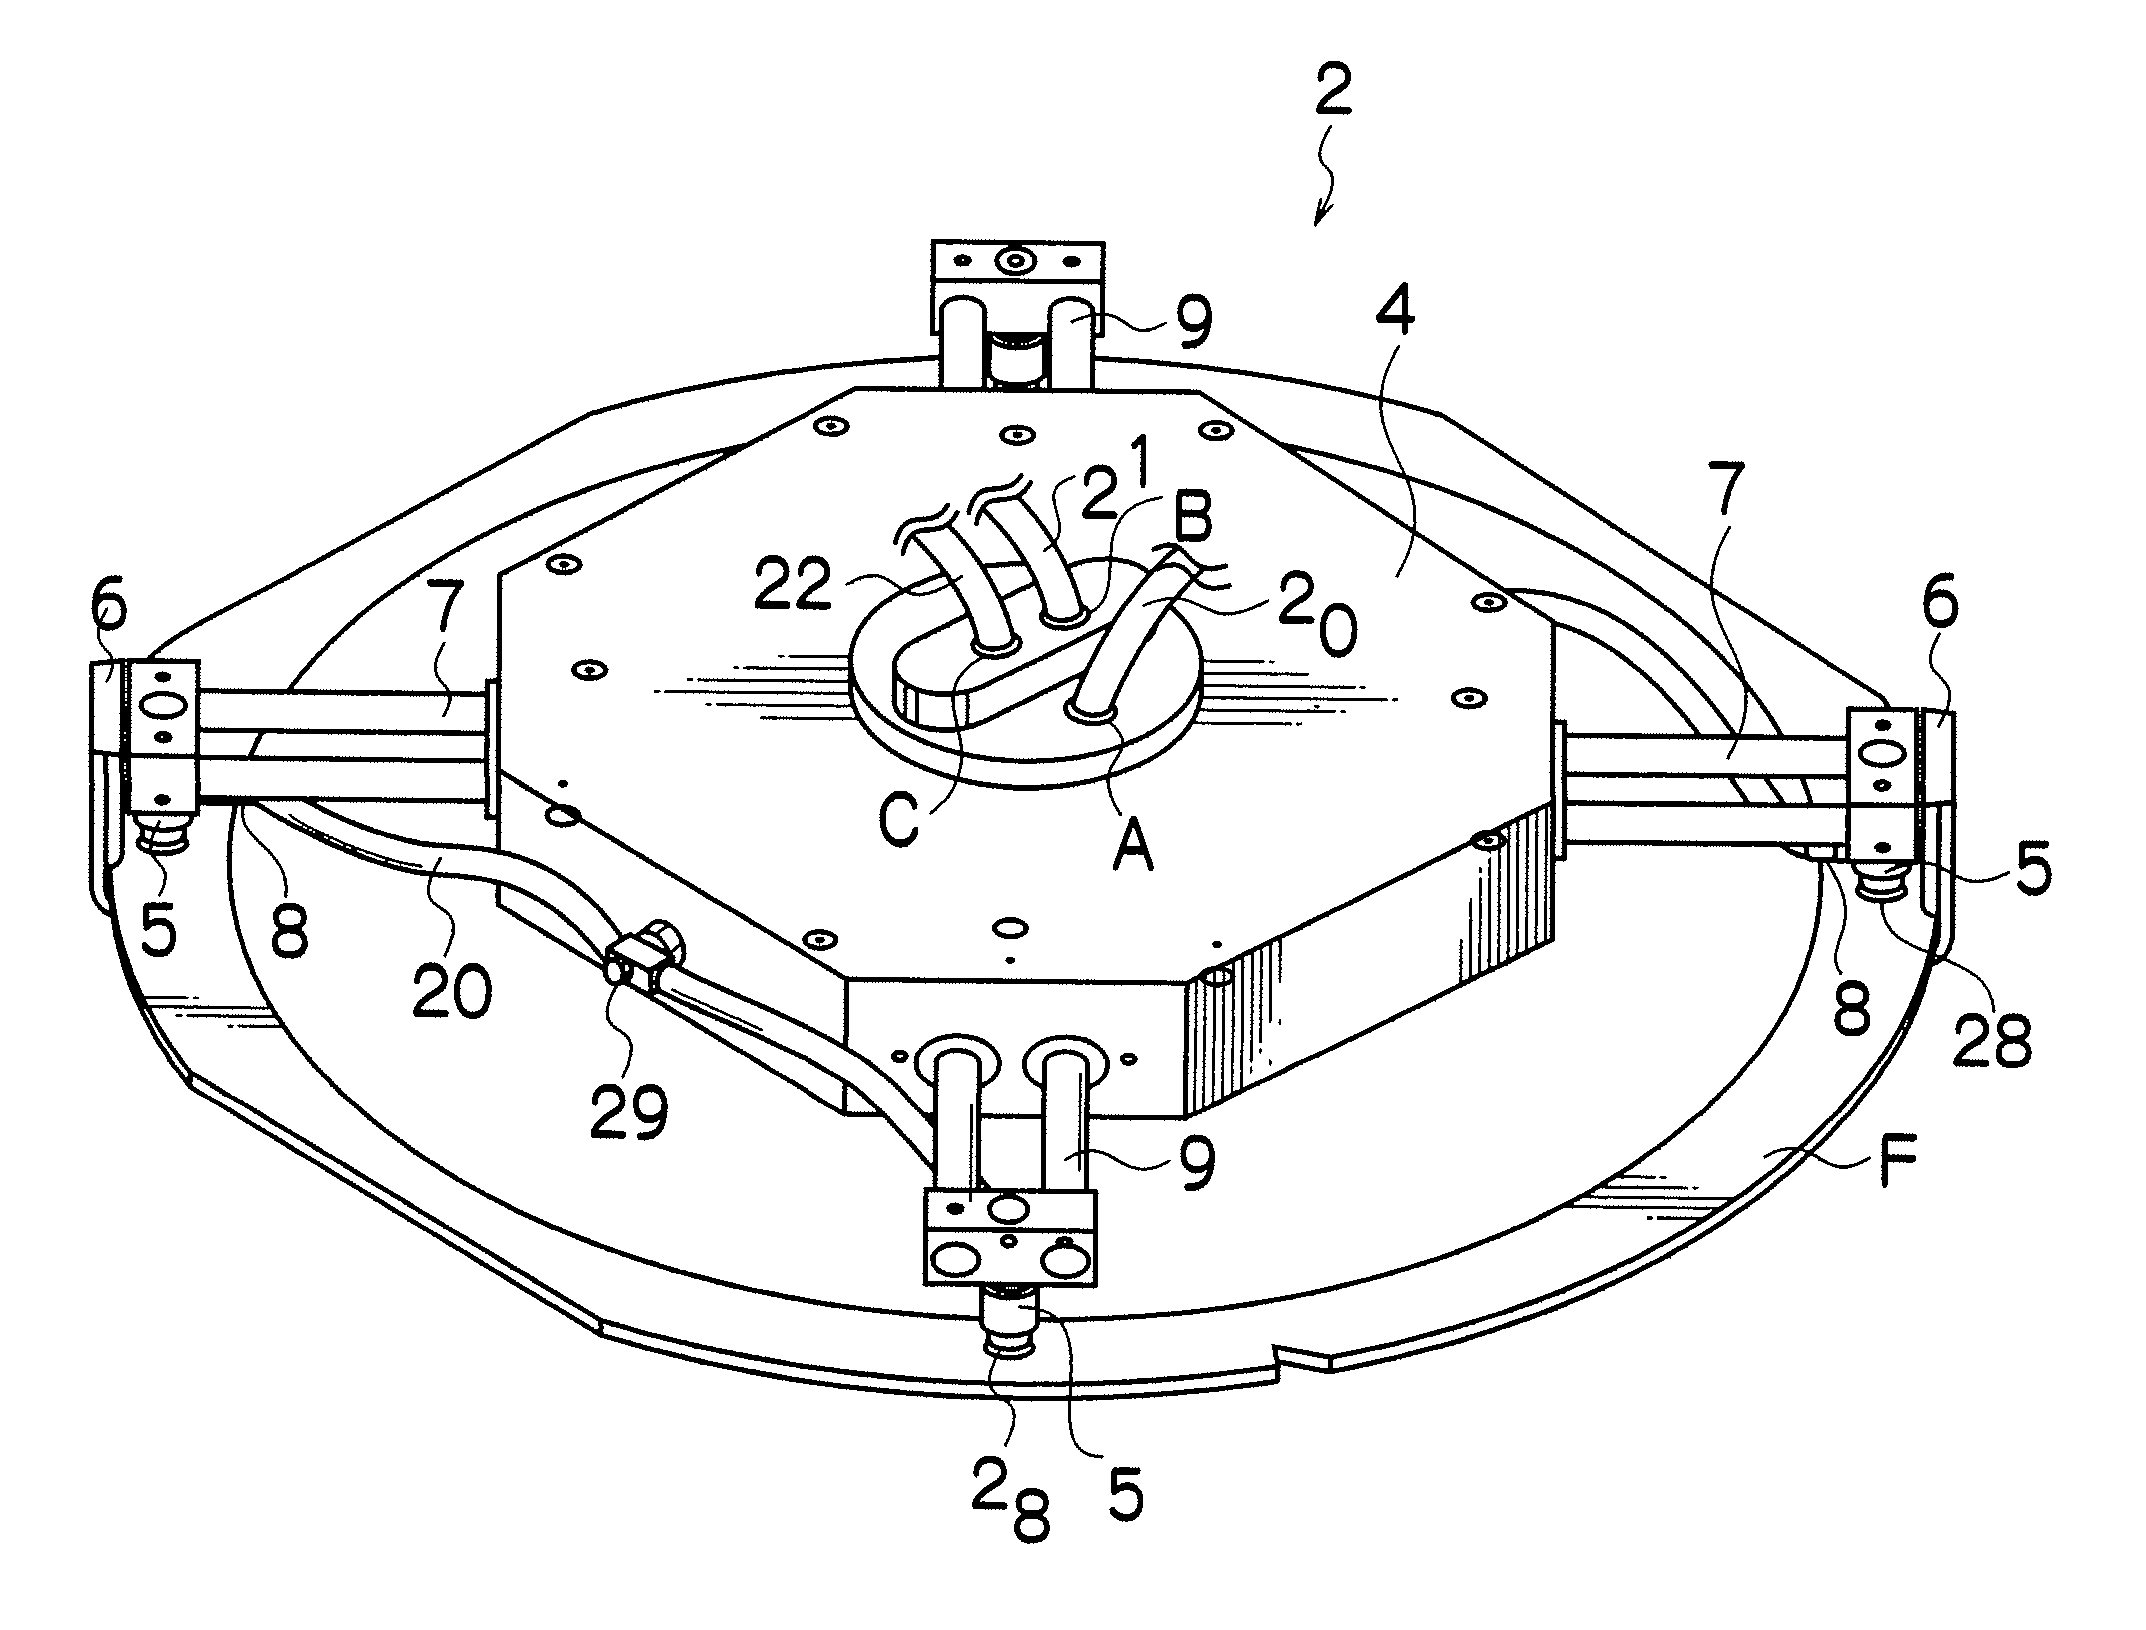 Work transfer device and method of transferring work